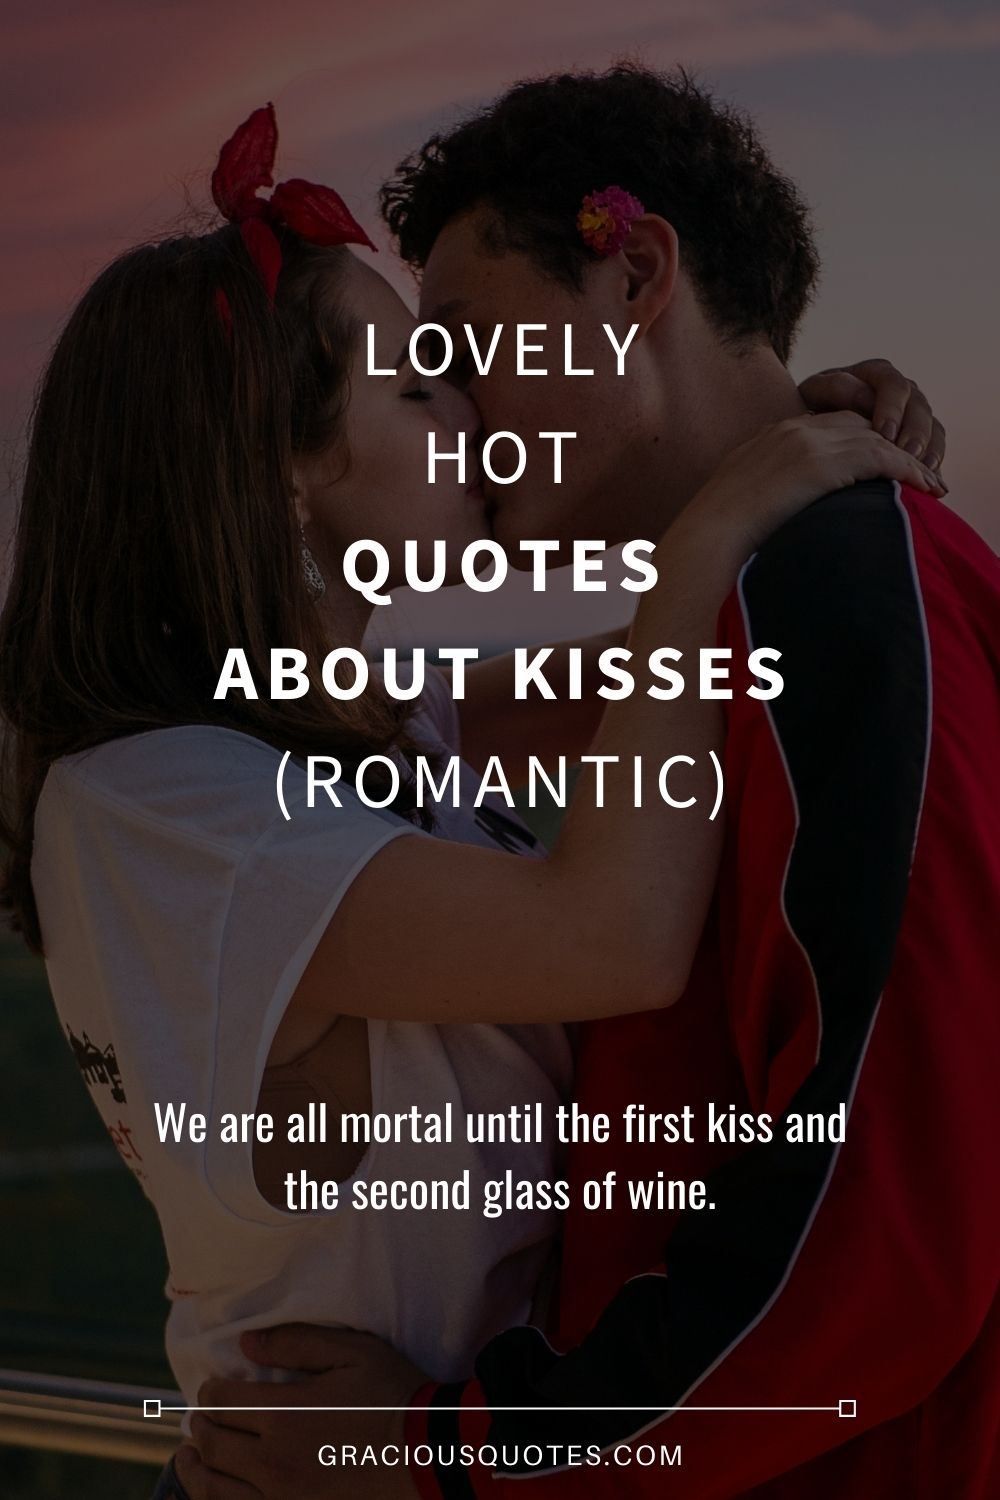 Lovely Hot Quotes About Kisses (ROMANTIC) - Gracious Quotes